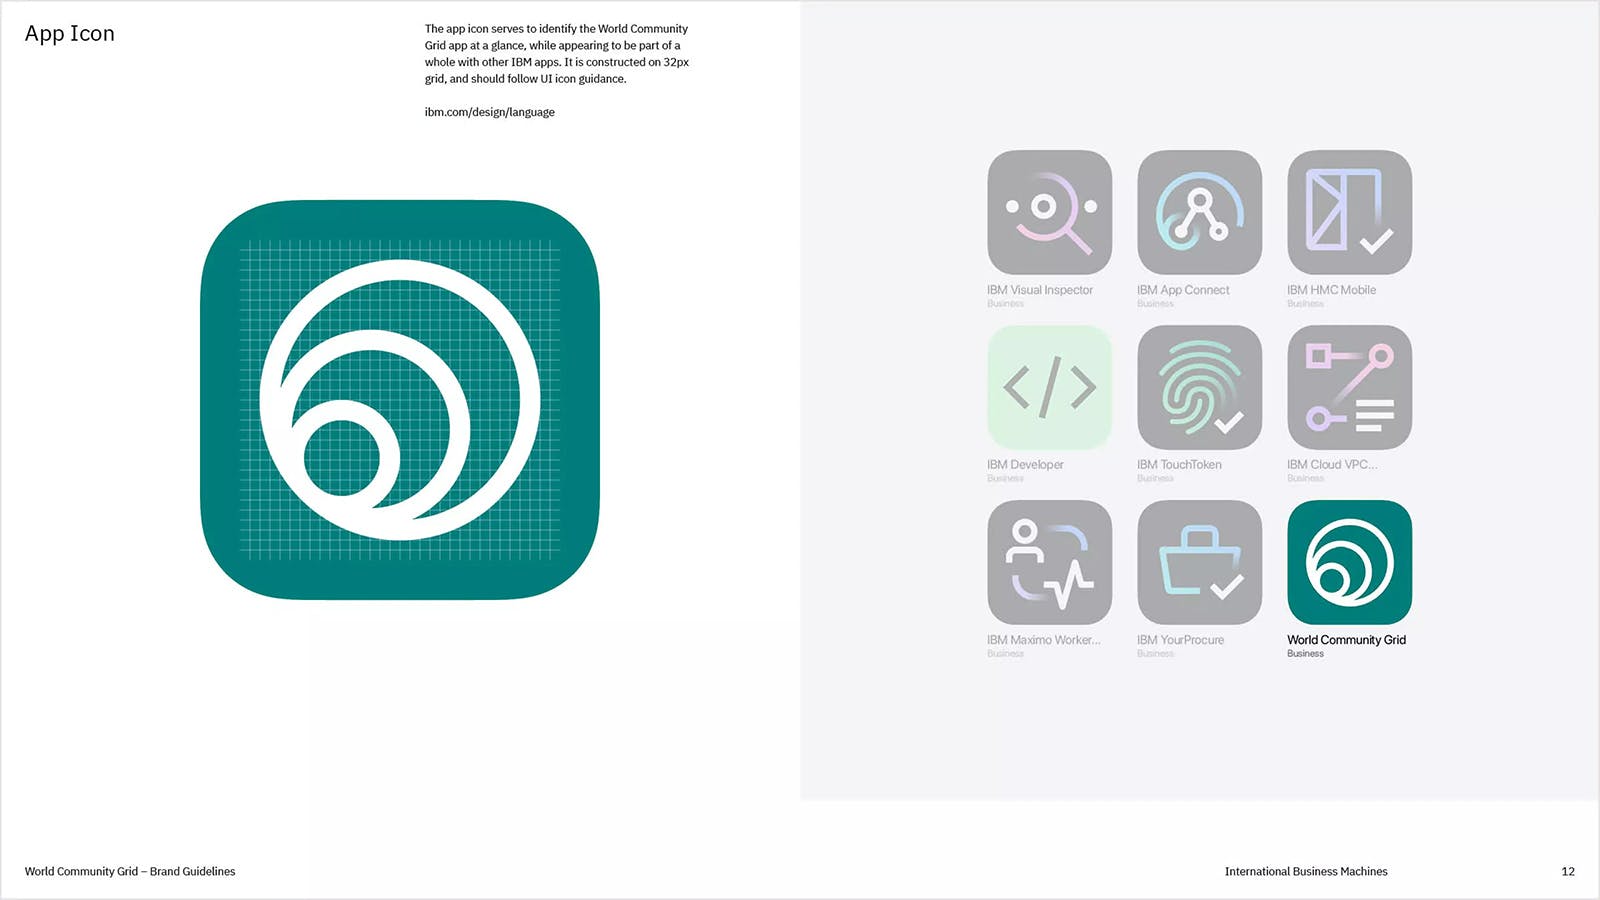 An overview of the App icon compared to similar IBM app icons